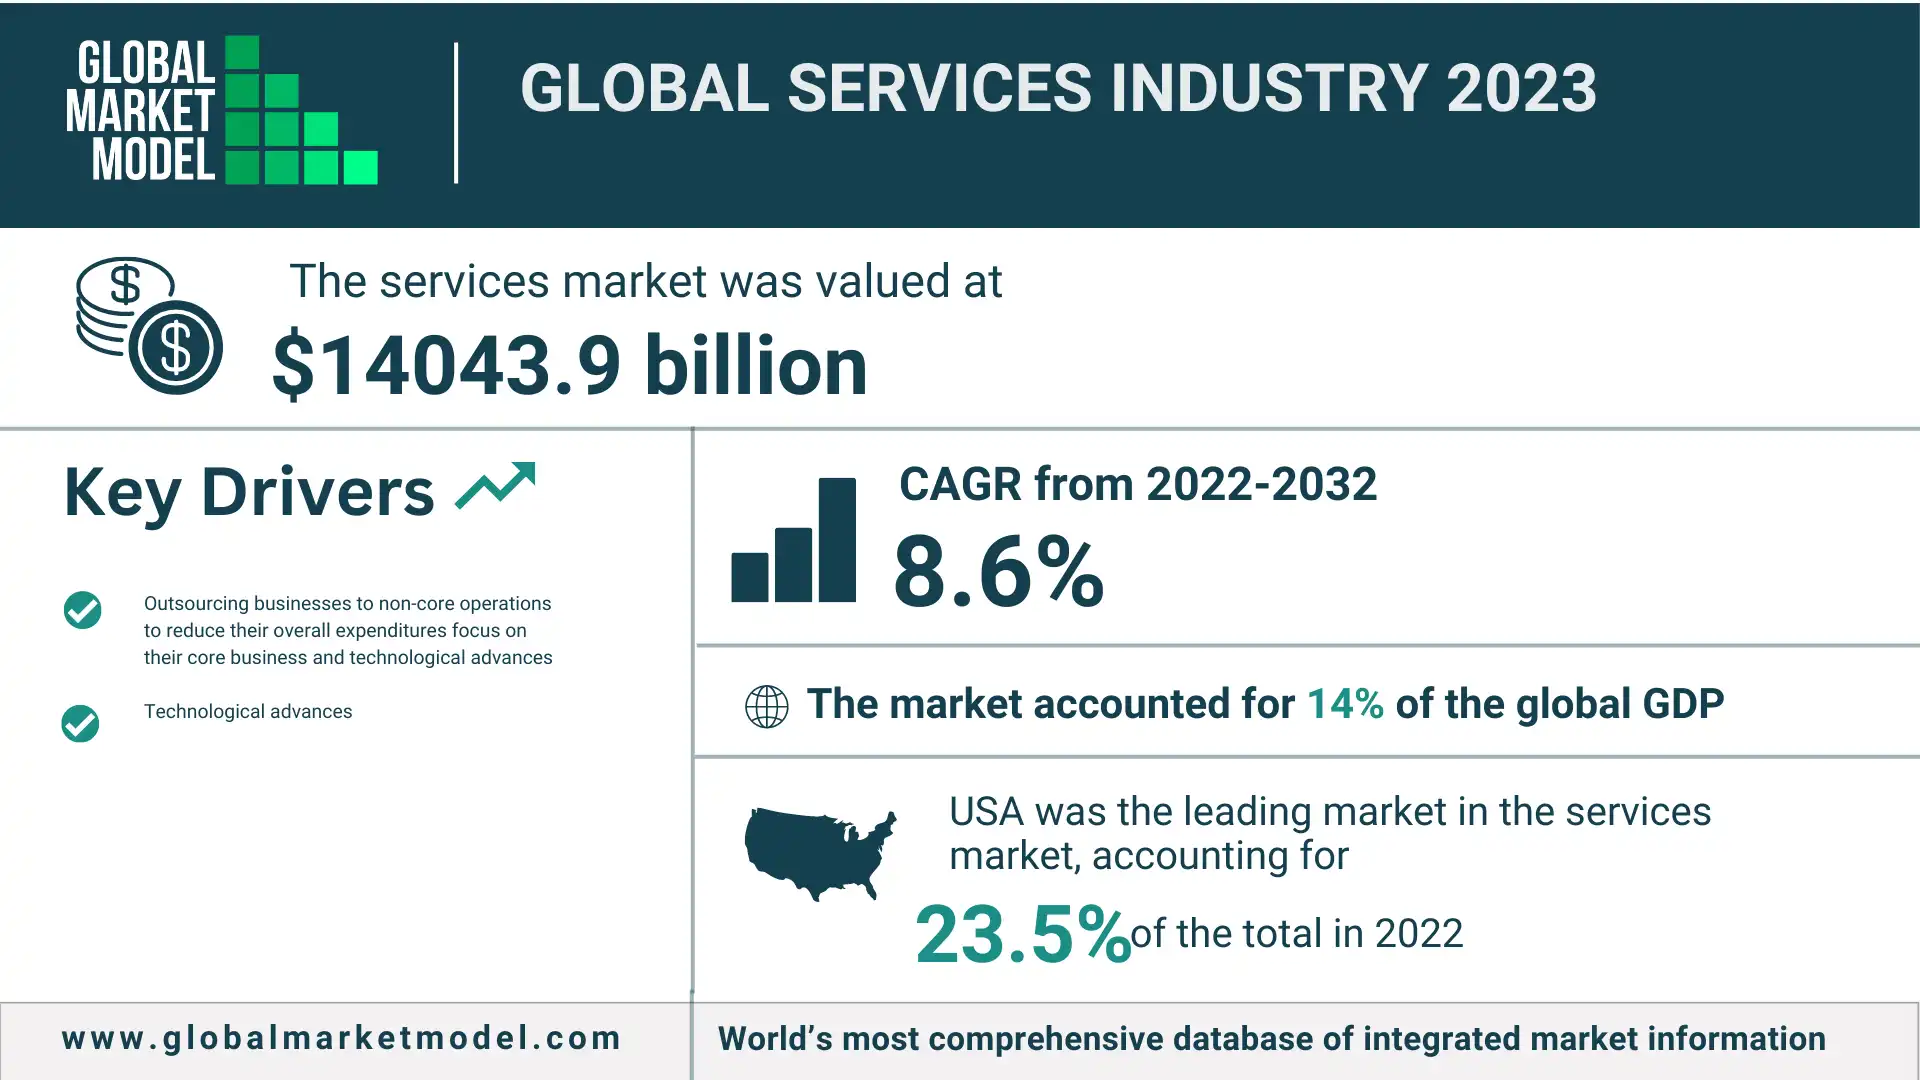 Global Services Industry 2023